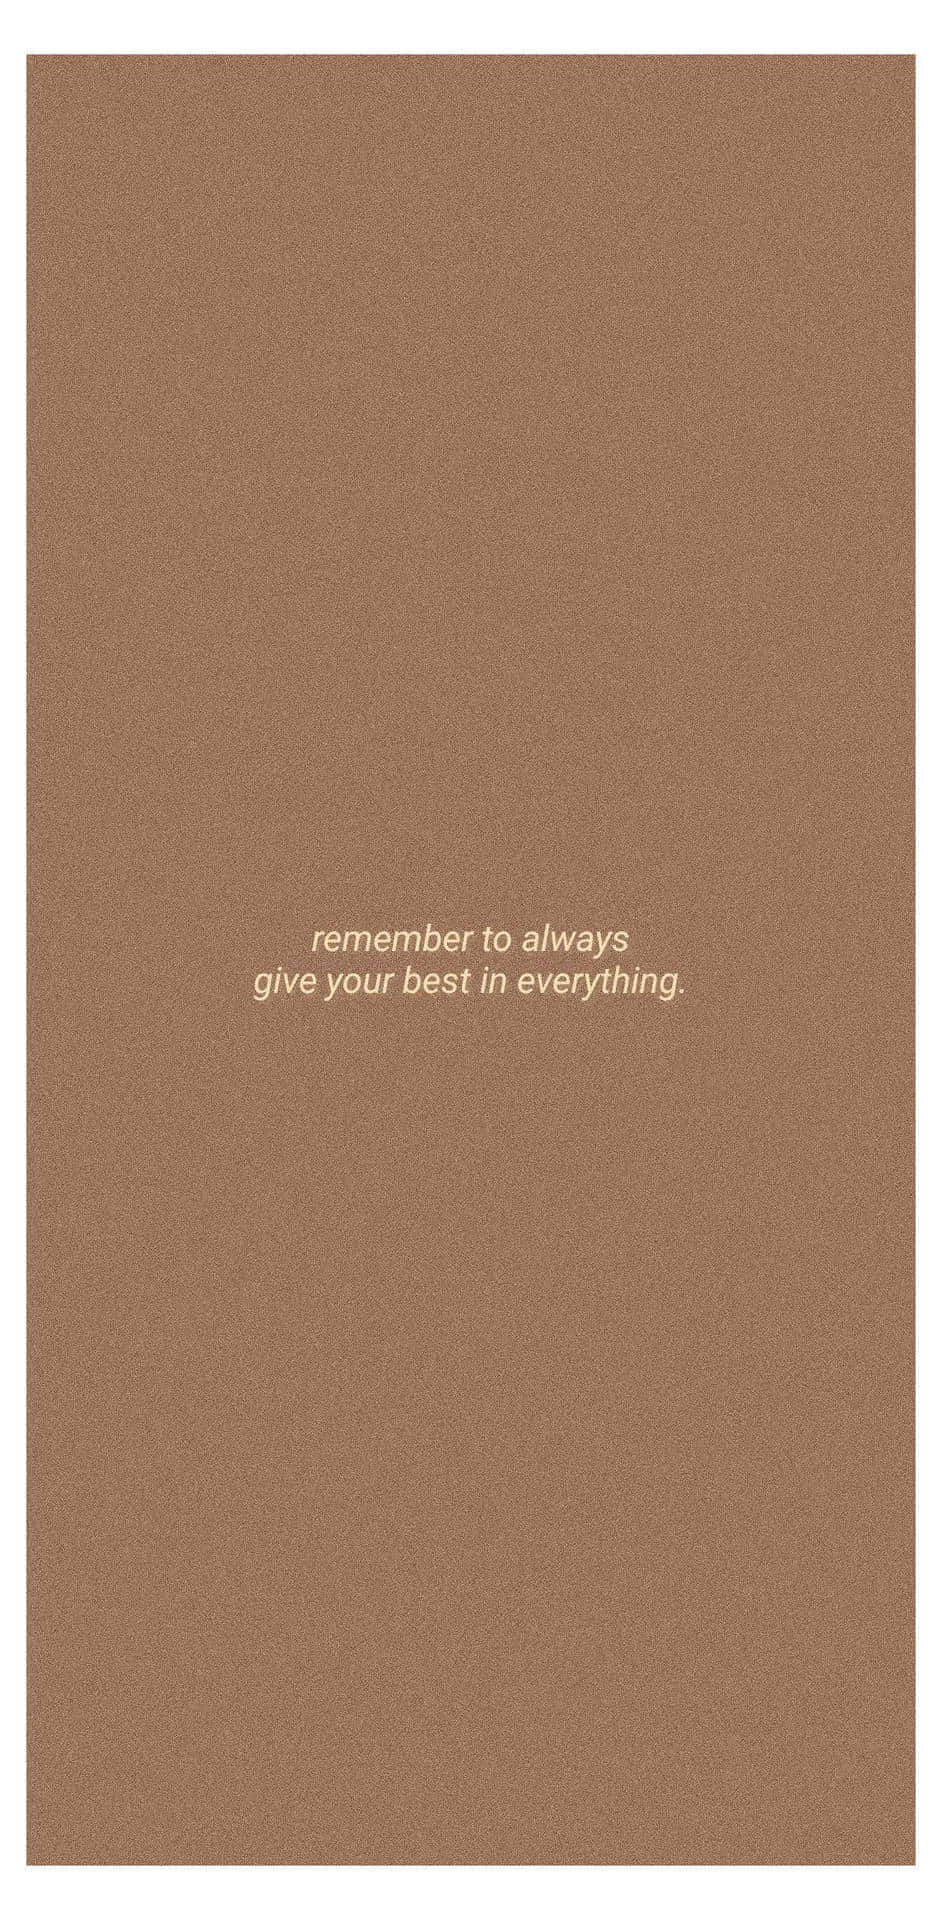 Minimalist Brown Aesthetic With Quote Wallpaper